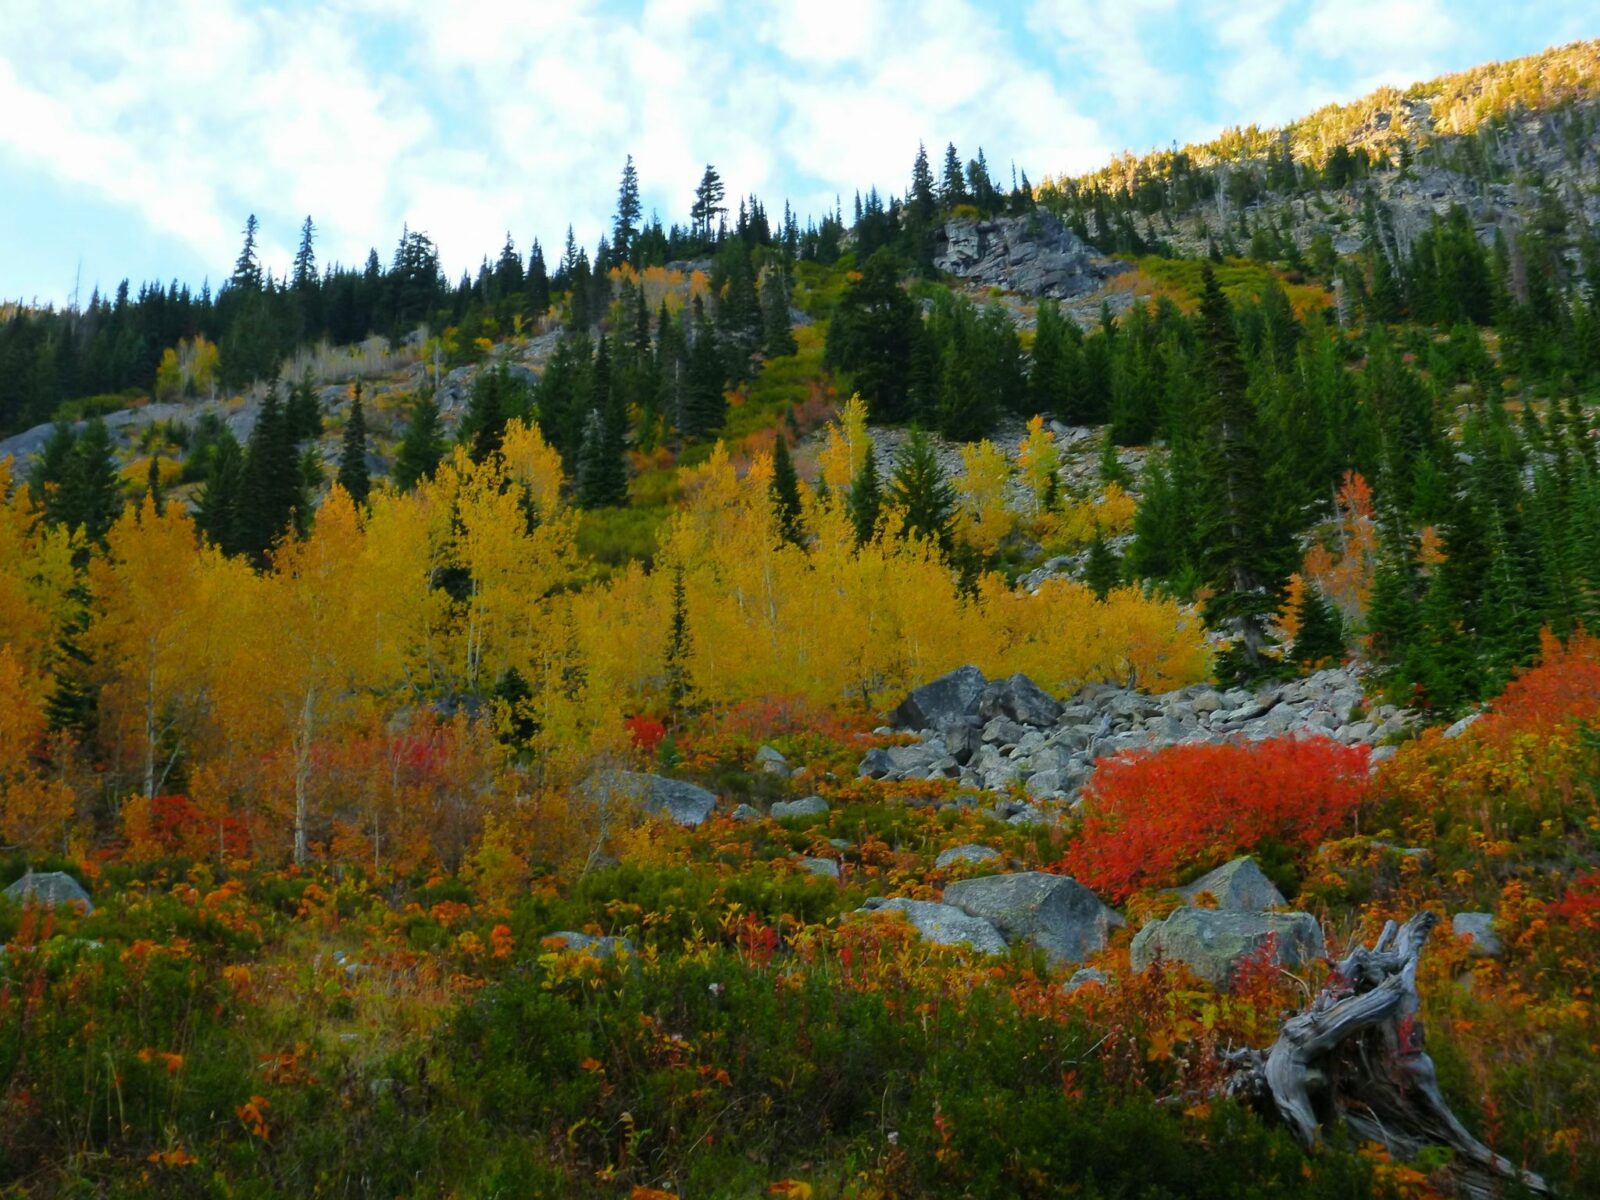 Red, yellow and orange bushes and trees in fall along the open and rocky section of the Lake Stuart trail